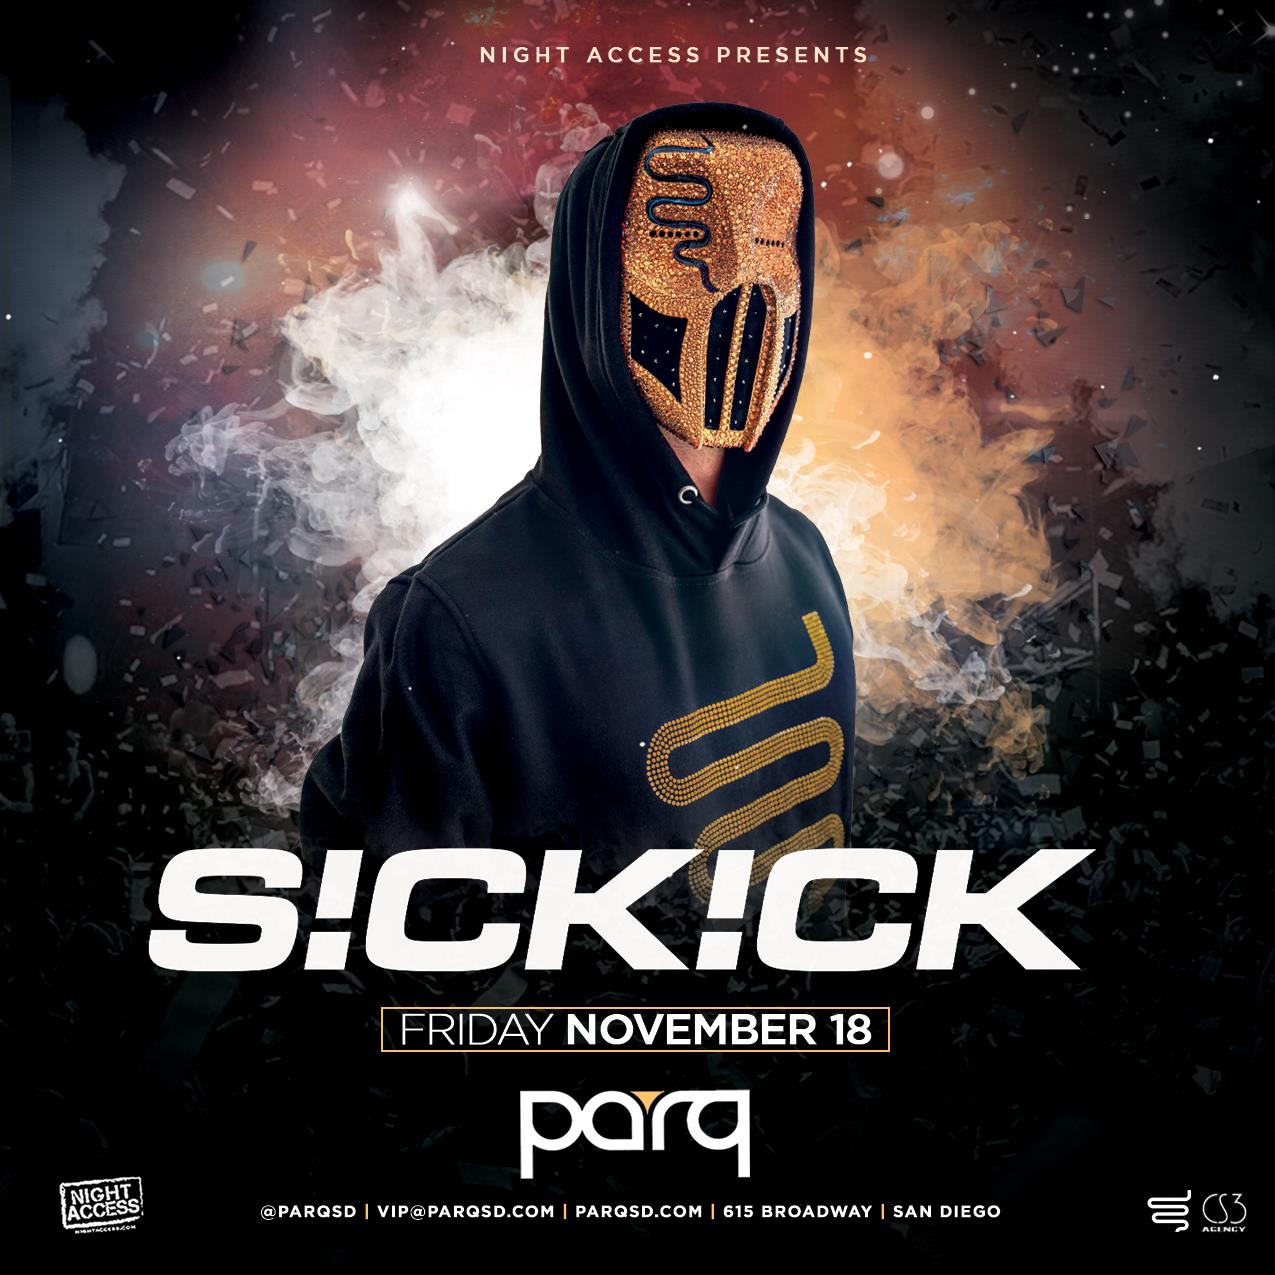 Buy Tickets to Sickick in San Diego on Nov 18, 2022